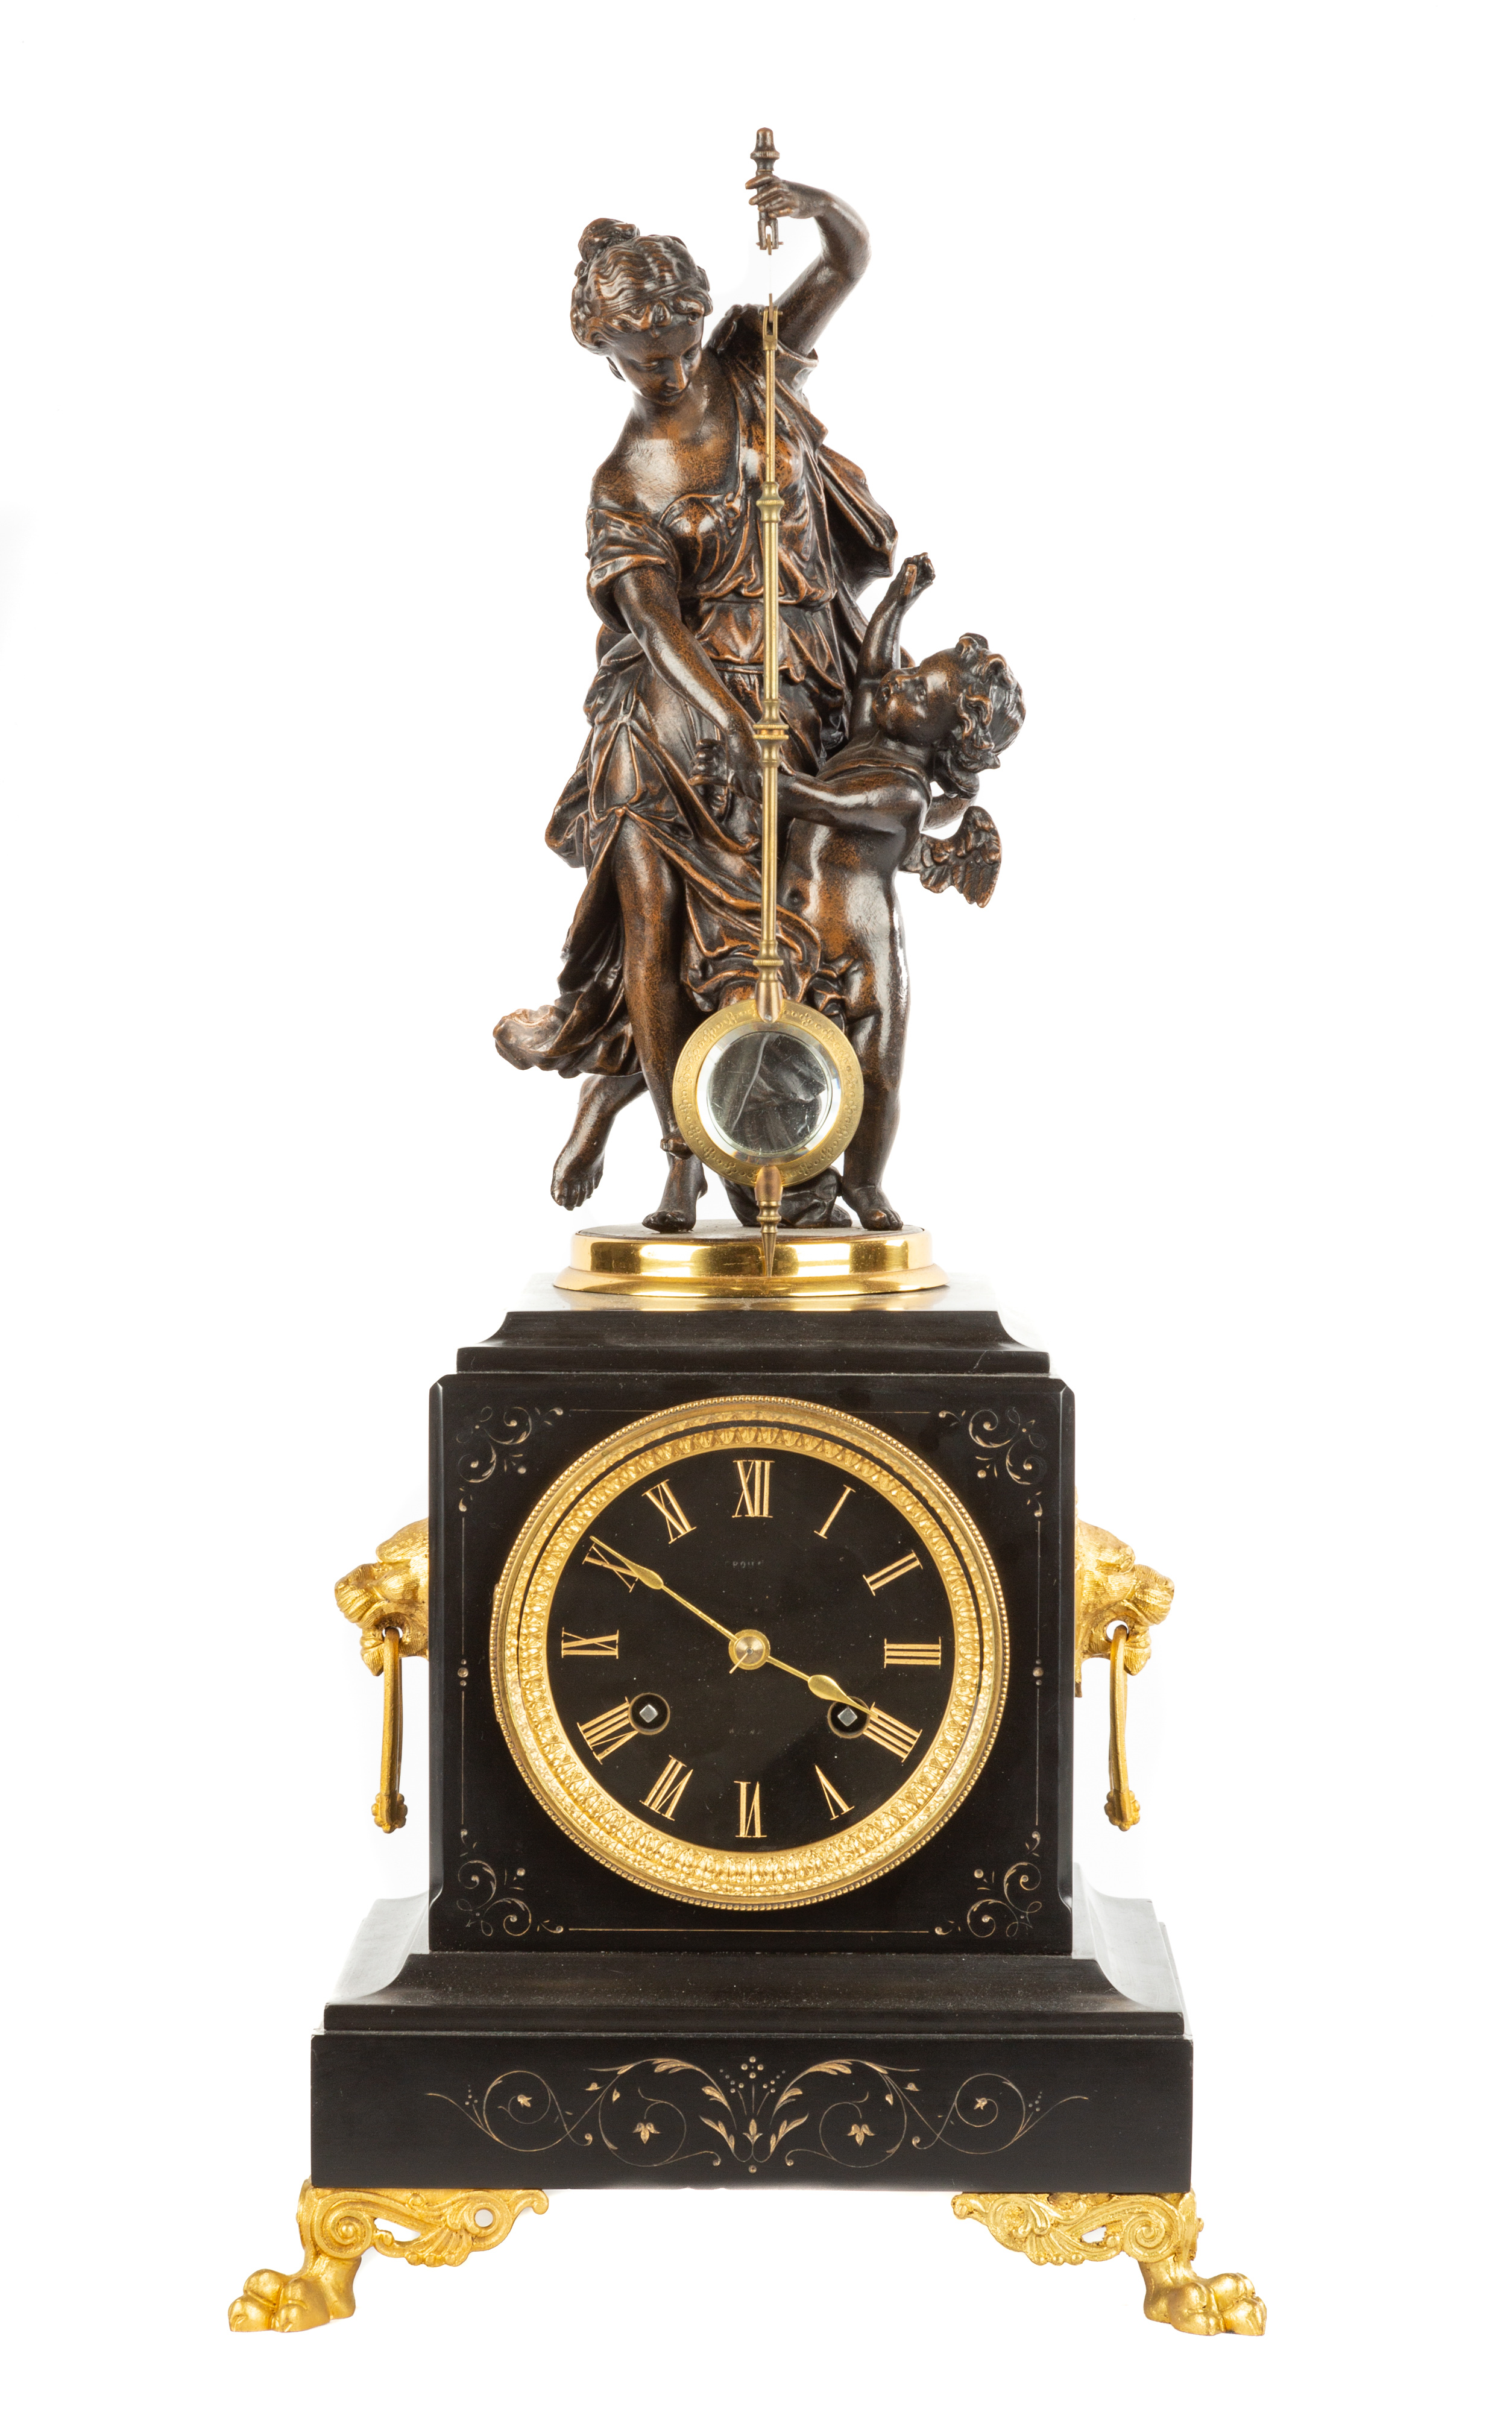 FRENCH MYSTERY CLOCK 19th century  2c89d2